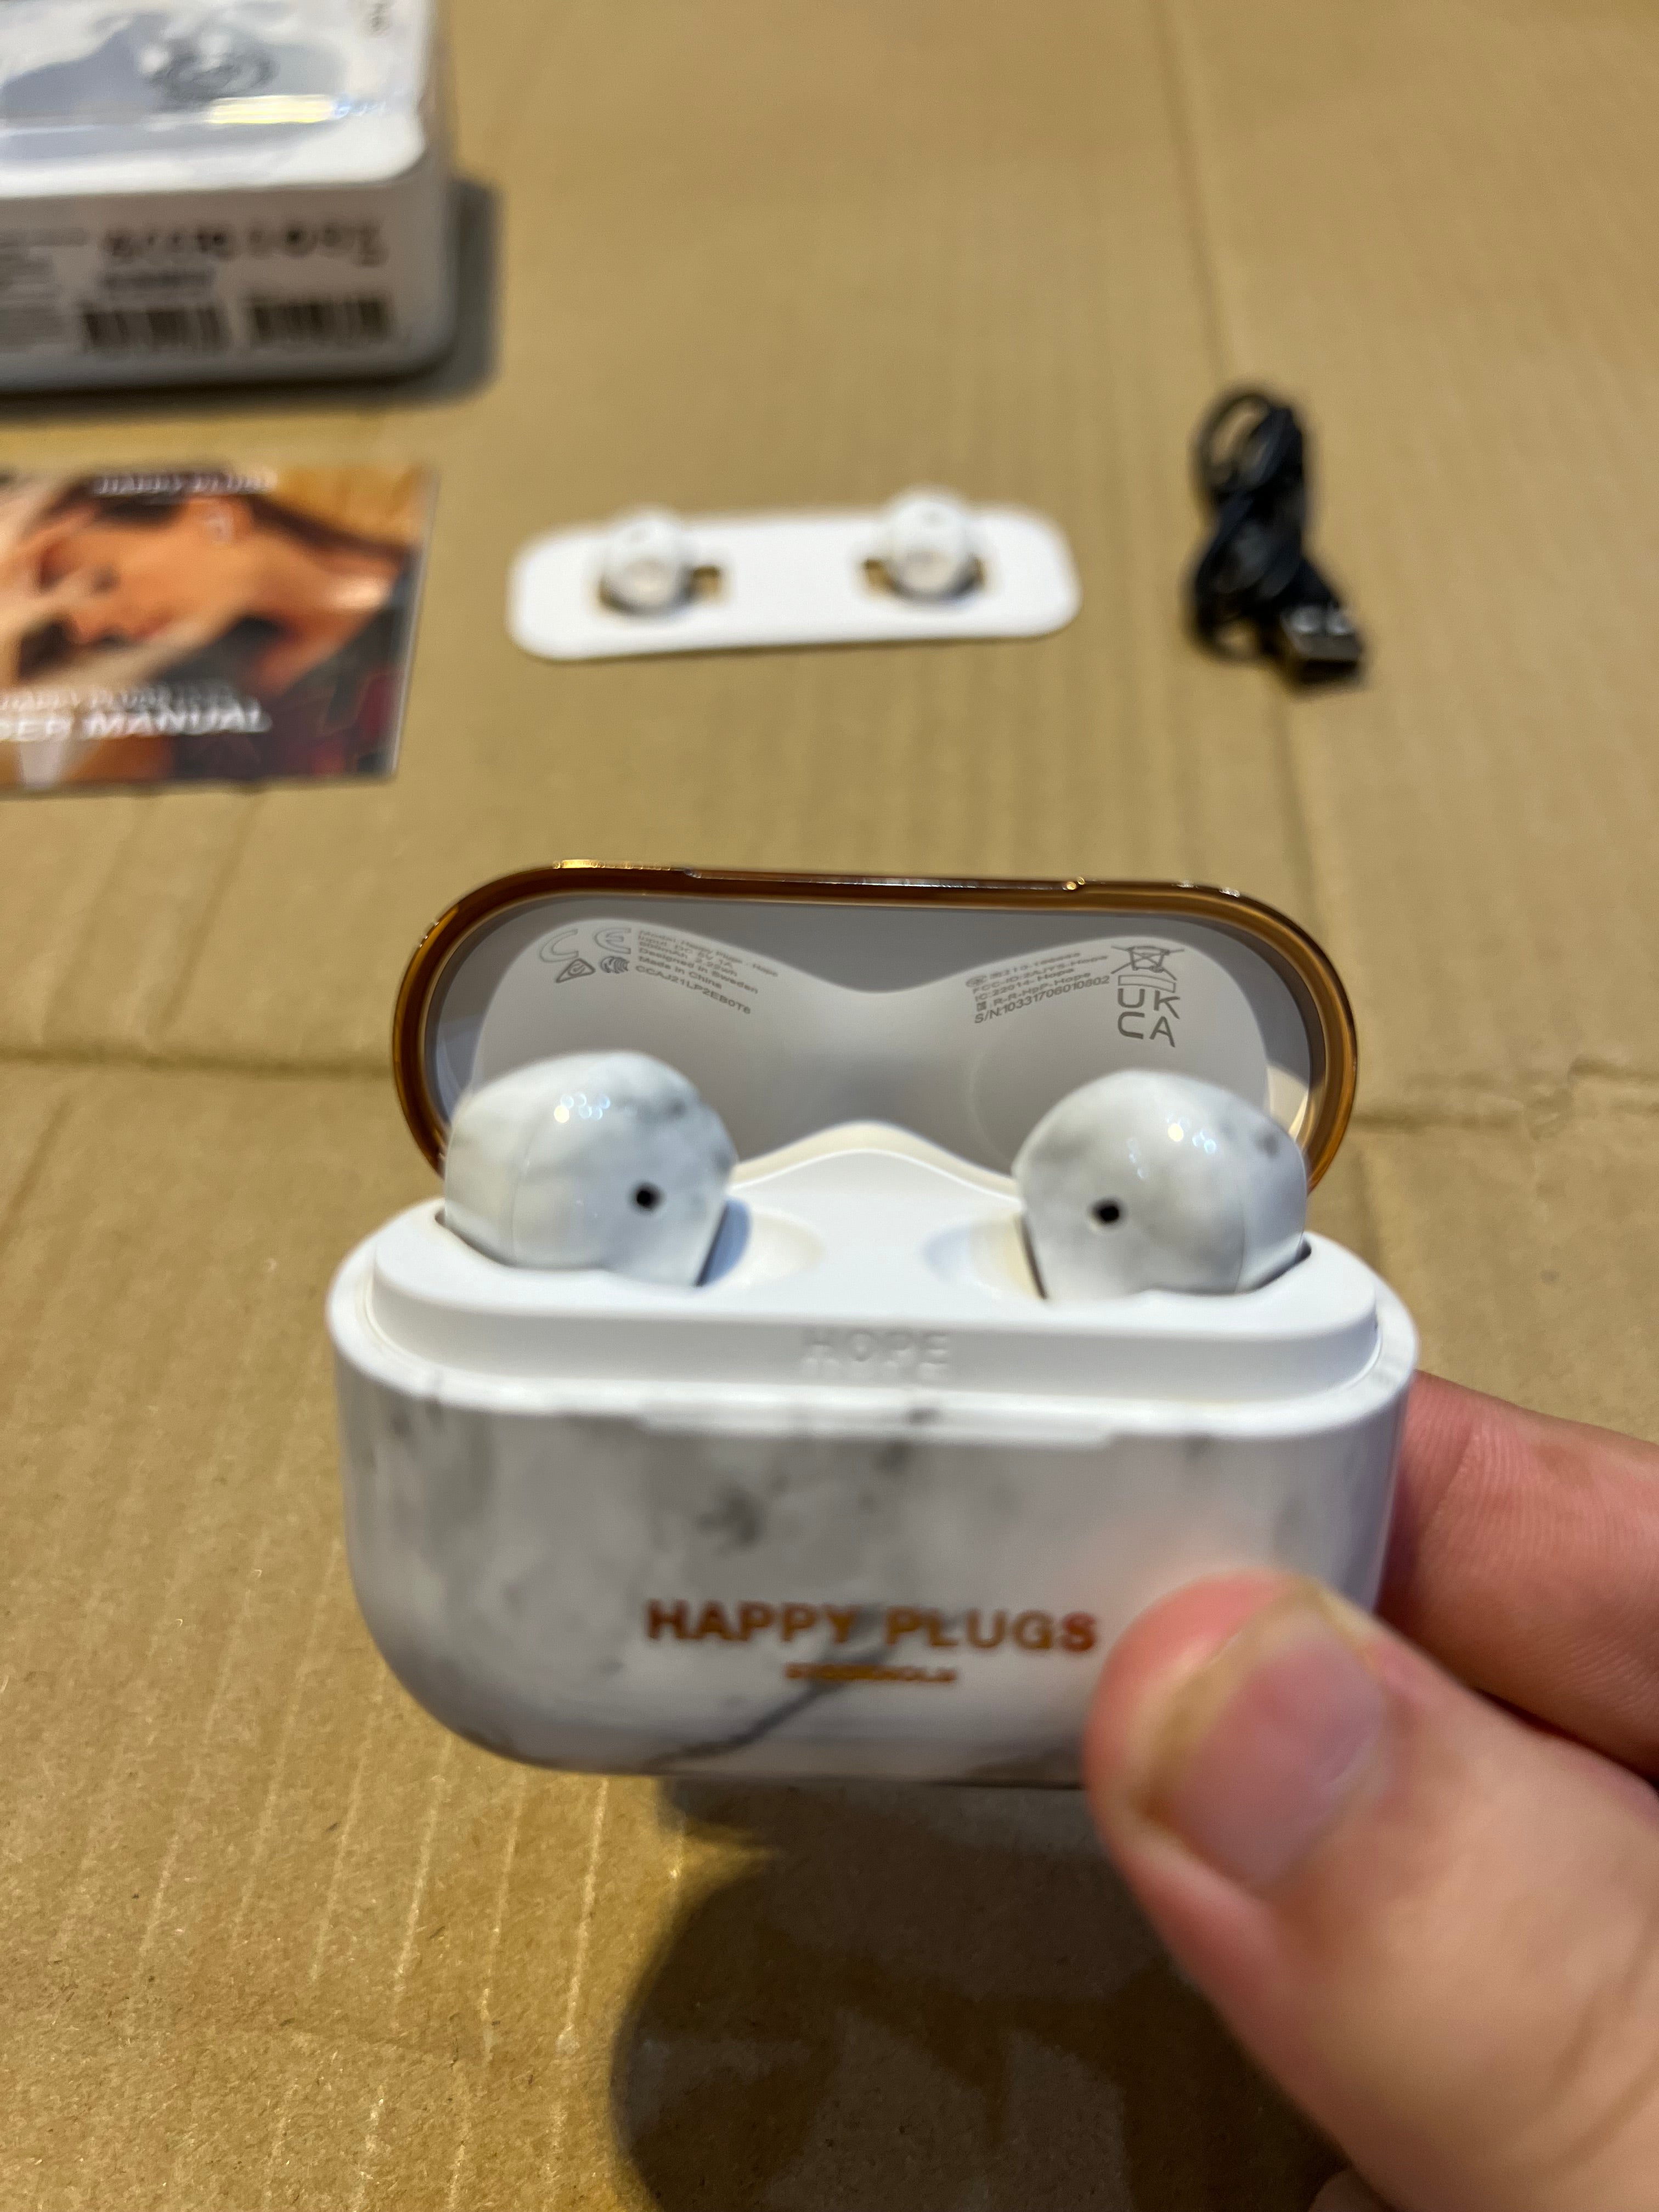 Happy Plugs AirPods Very High Quality